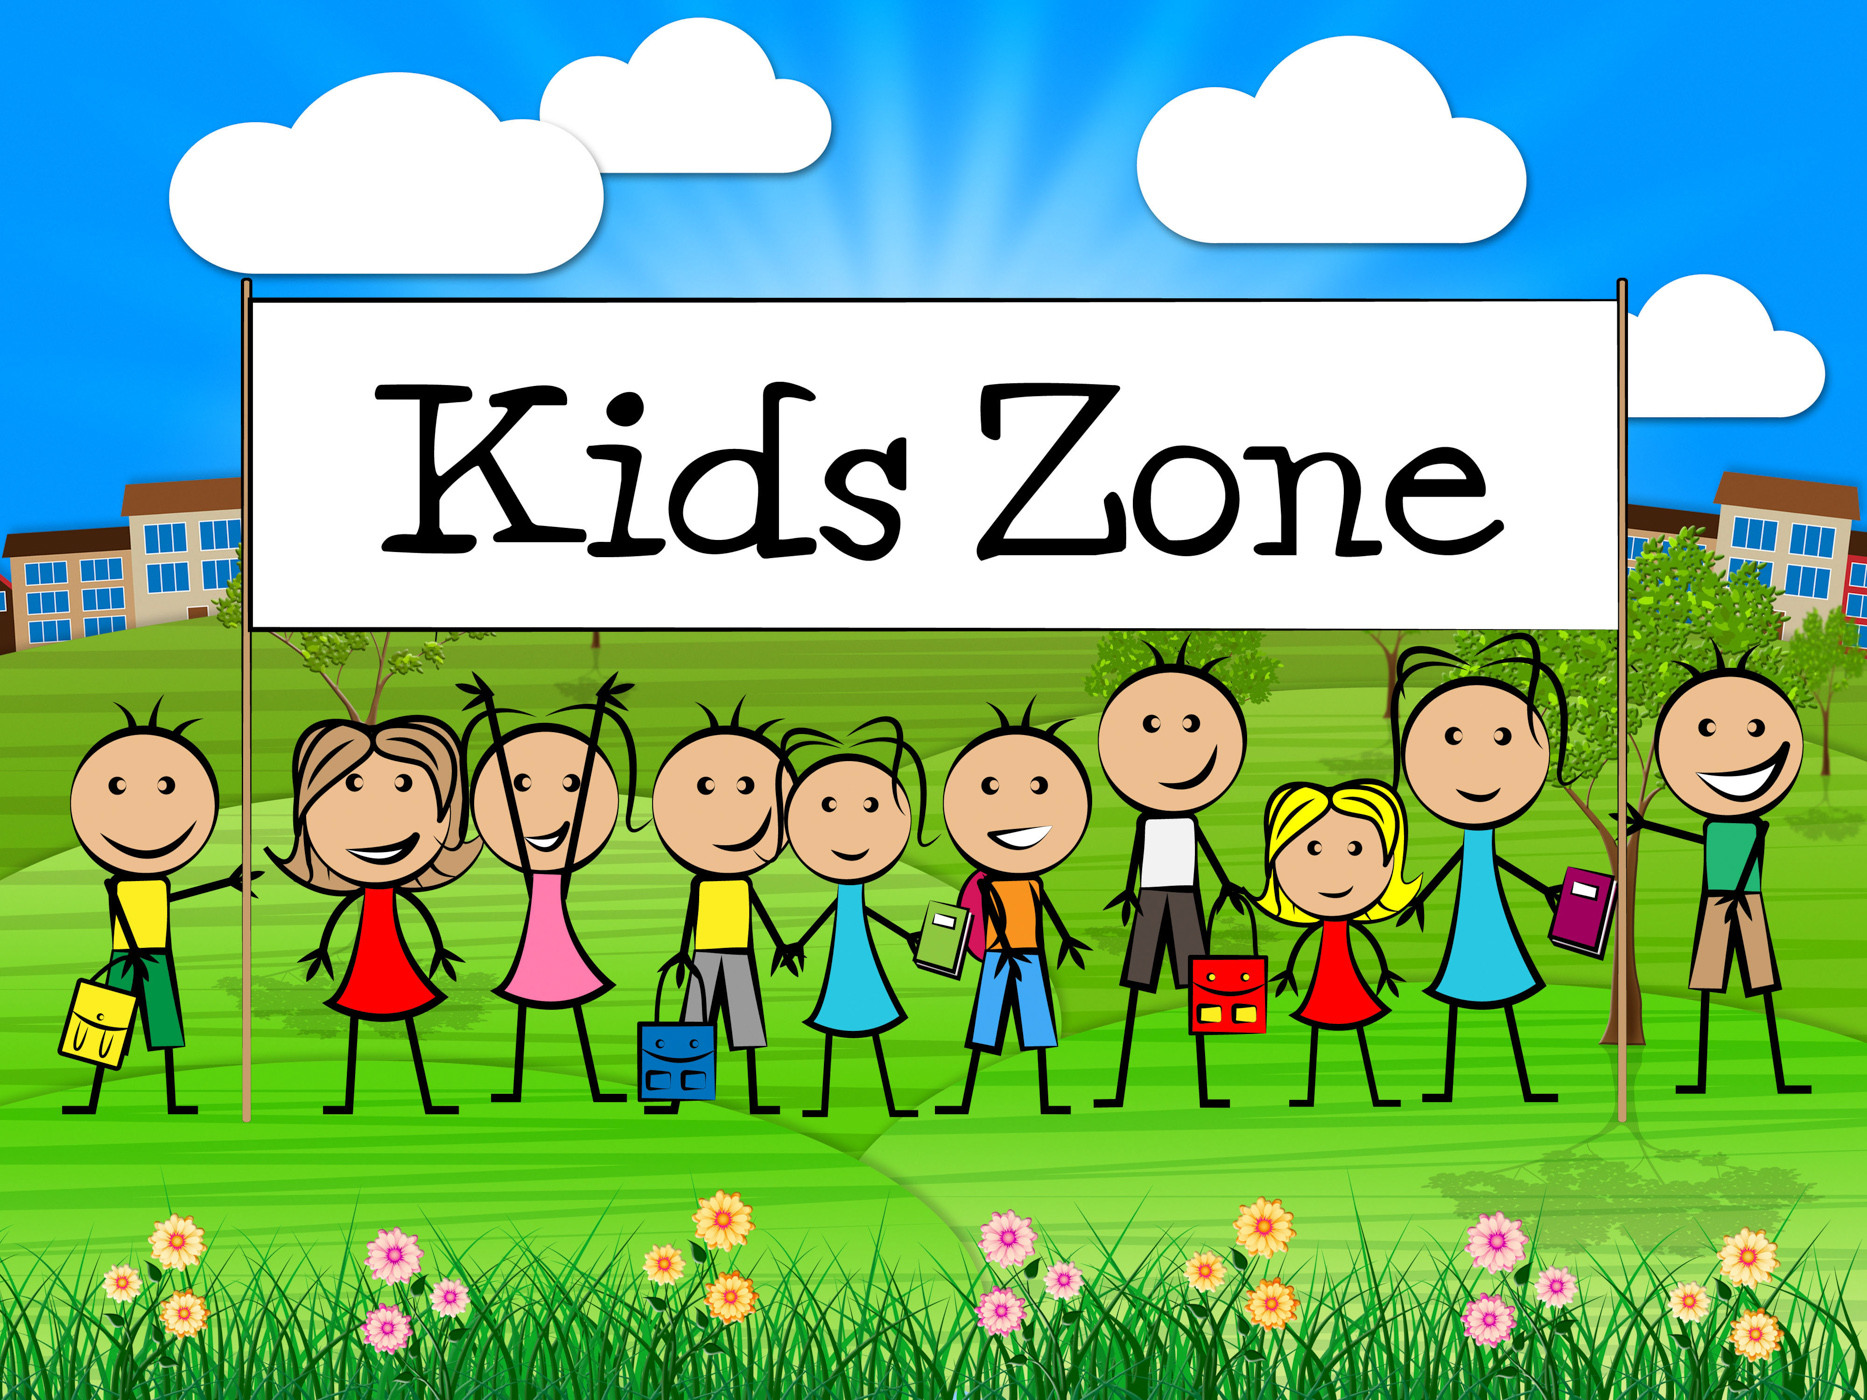 Kids zone banner shows free time and child photo